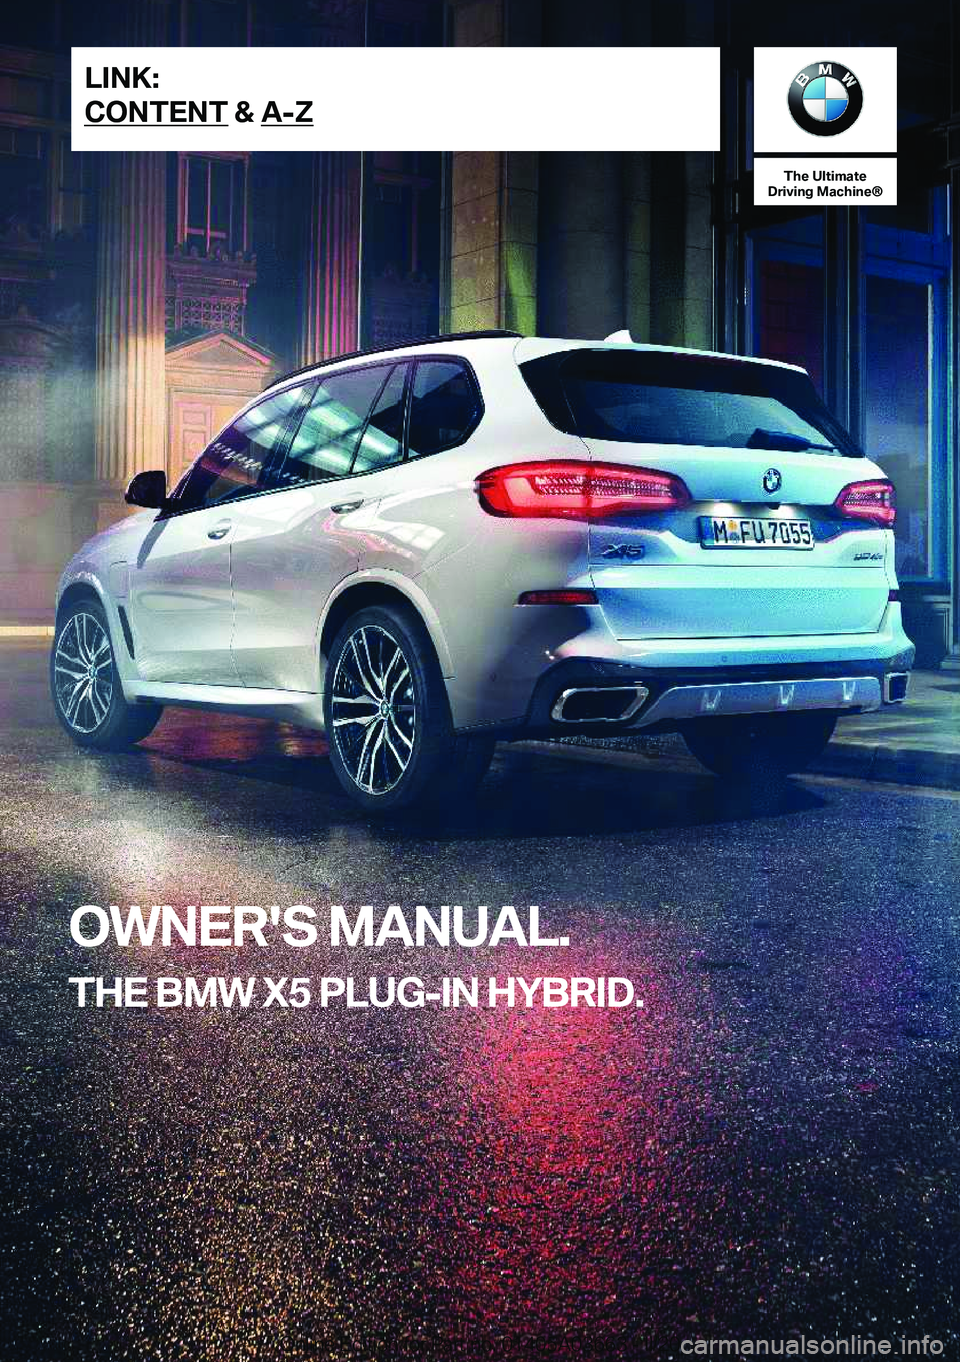 BMW X5 PLUG-IN HYBRID 2021  Owners Manual �T�h�e��U�l�t�i�m�a�t�e
�D�r�i�v�i�n�g��M�a�c�h�i�n�e�n
�O�W�N�E�R�'�S��M�A�N�U�A�L�.
�T�H�E��B�M�W��X�5��P�L�U�G�-�I�N��H�Y�B�R�I�D�.�L�I�N�K�:
�C�O�N�T�E�N�T��&��A�-�Z�O�n�l�i�n�e��E�d